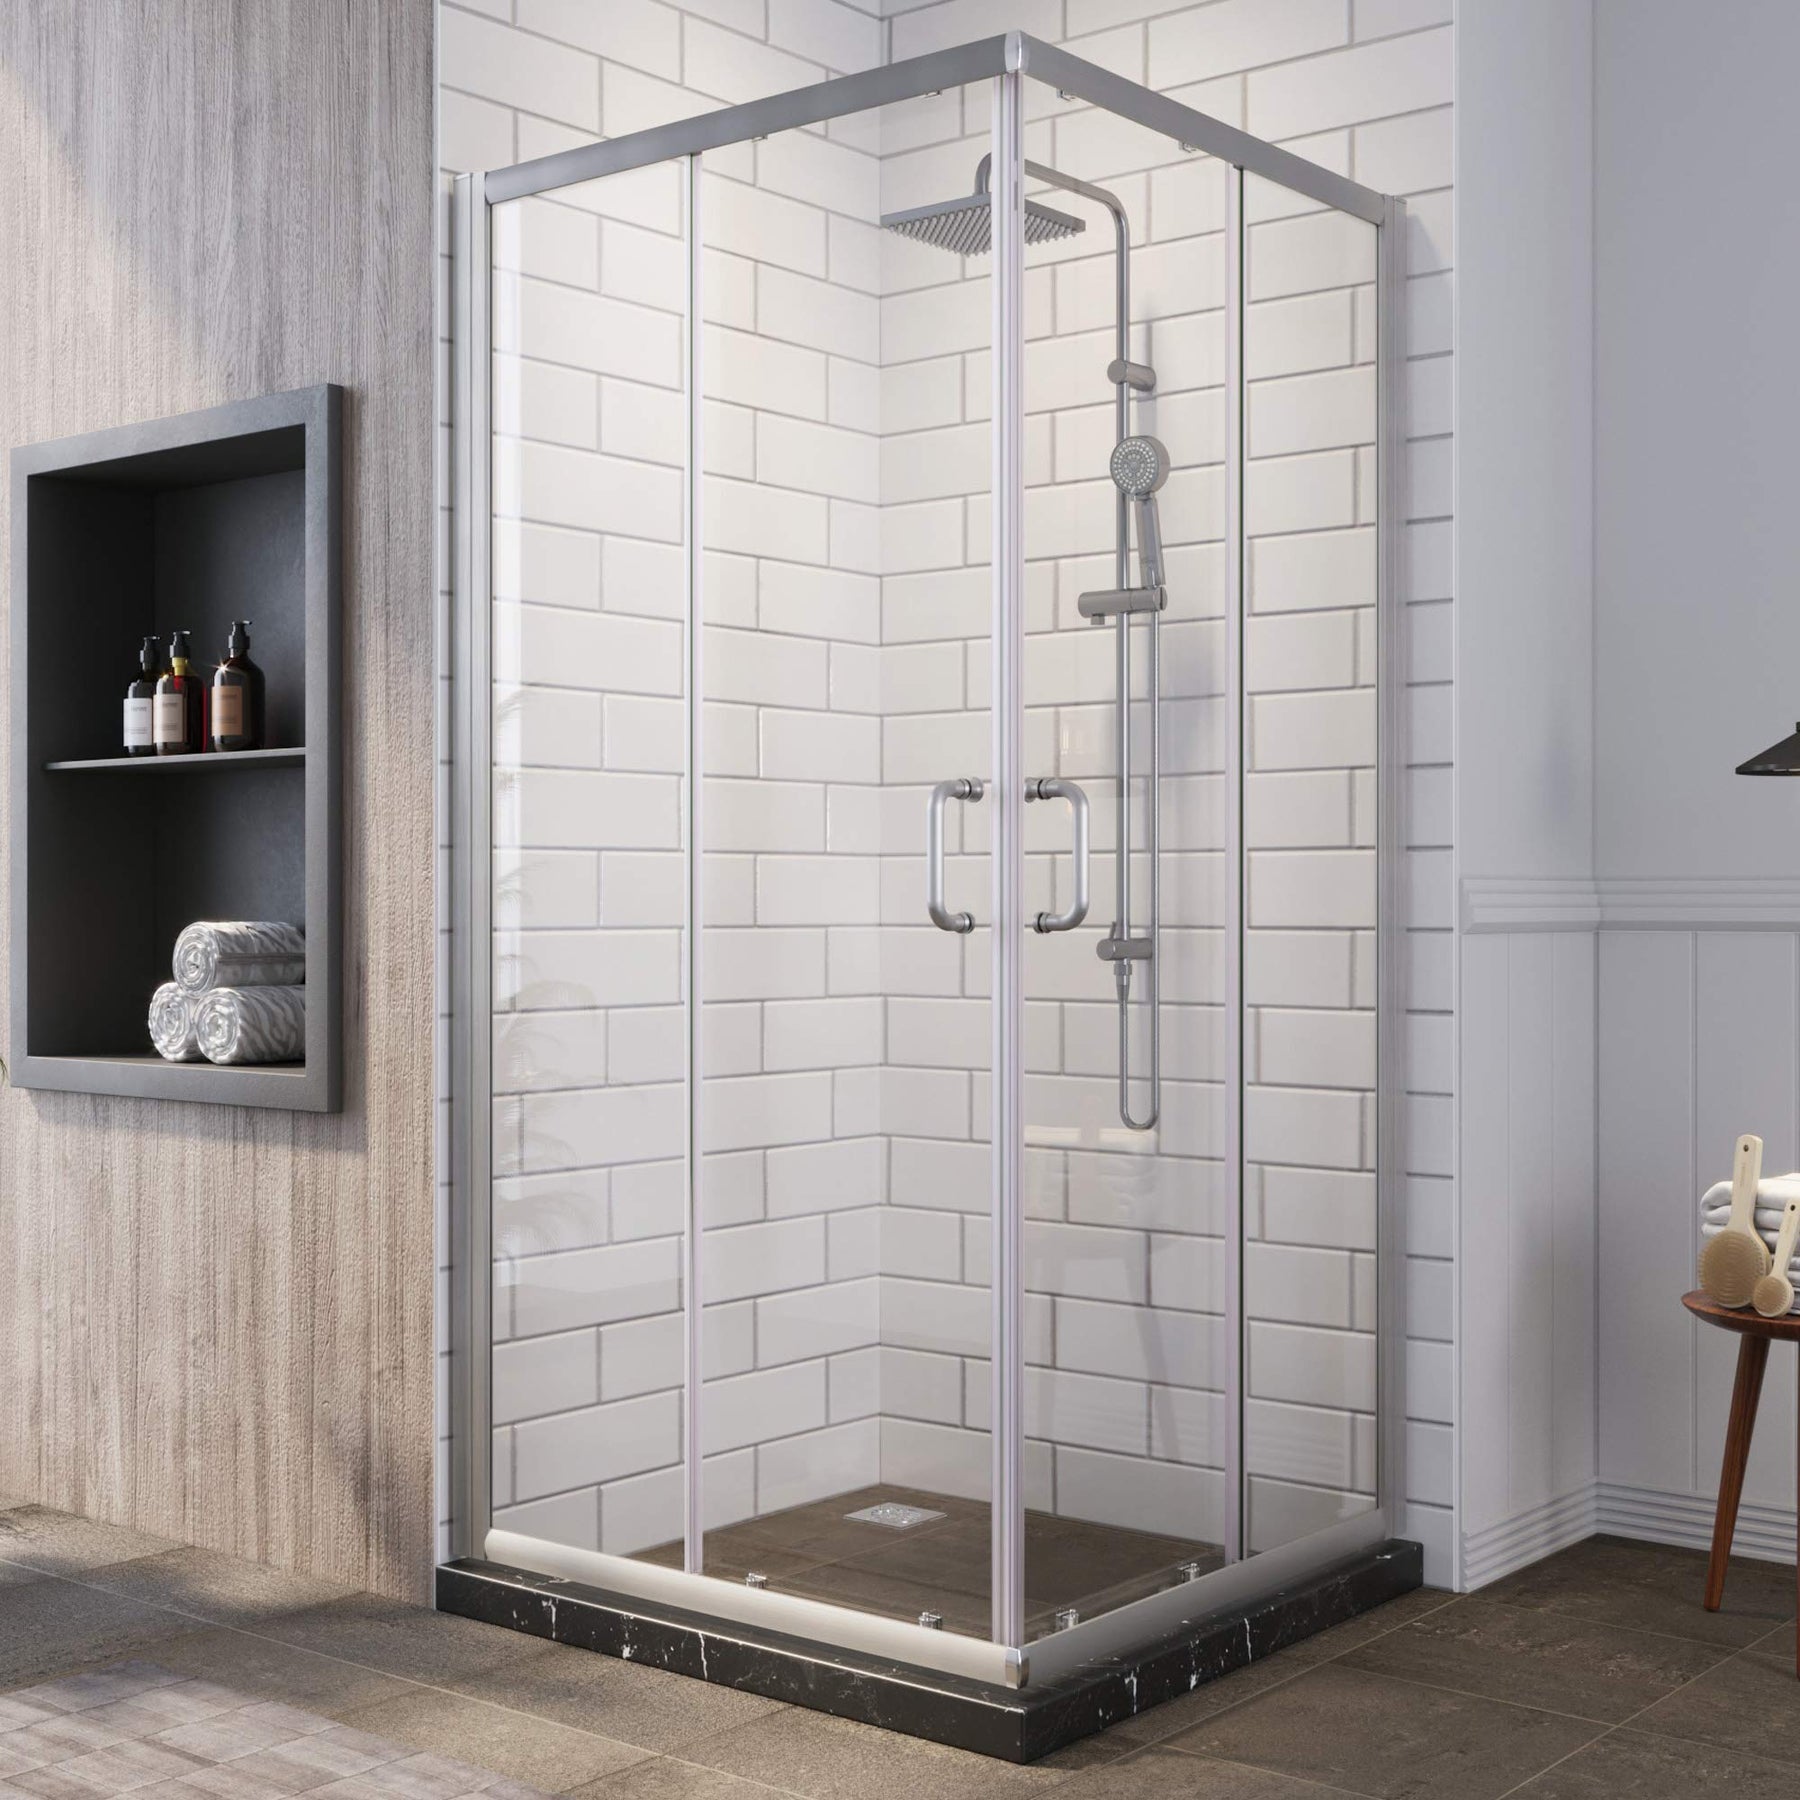 SUNNY SHOWER 34 in. L x 34 in. W x 72 in. H Brushed Nickel Finish Corner Entry Enclosure With Sliding Doors